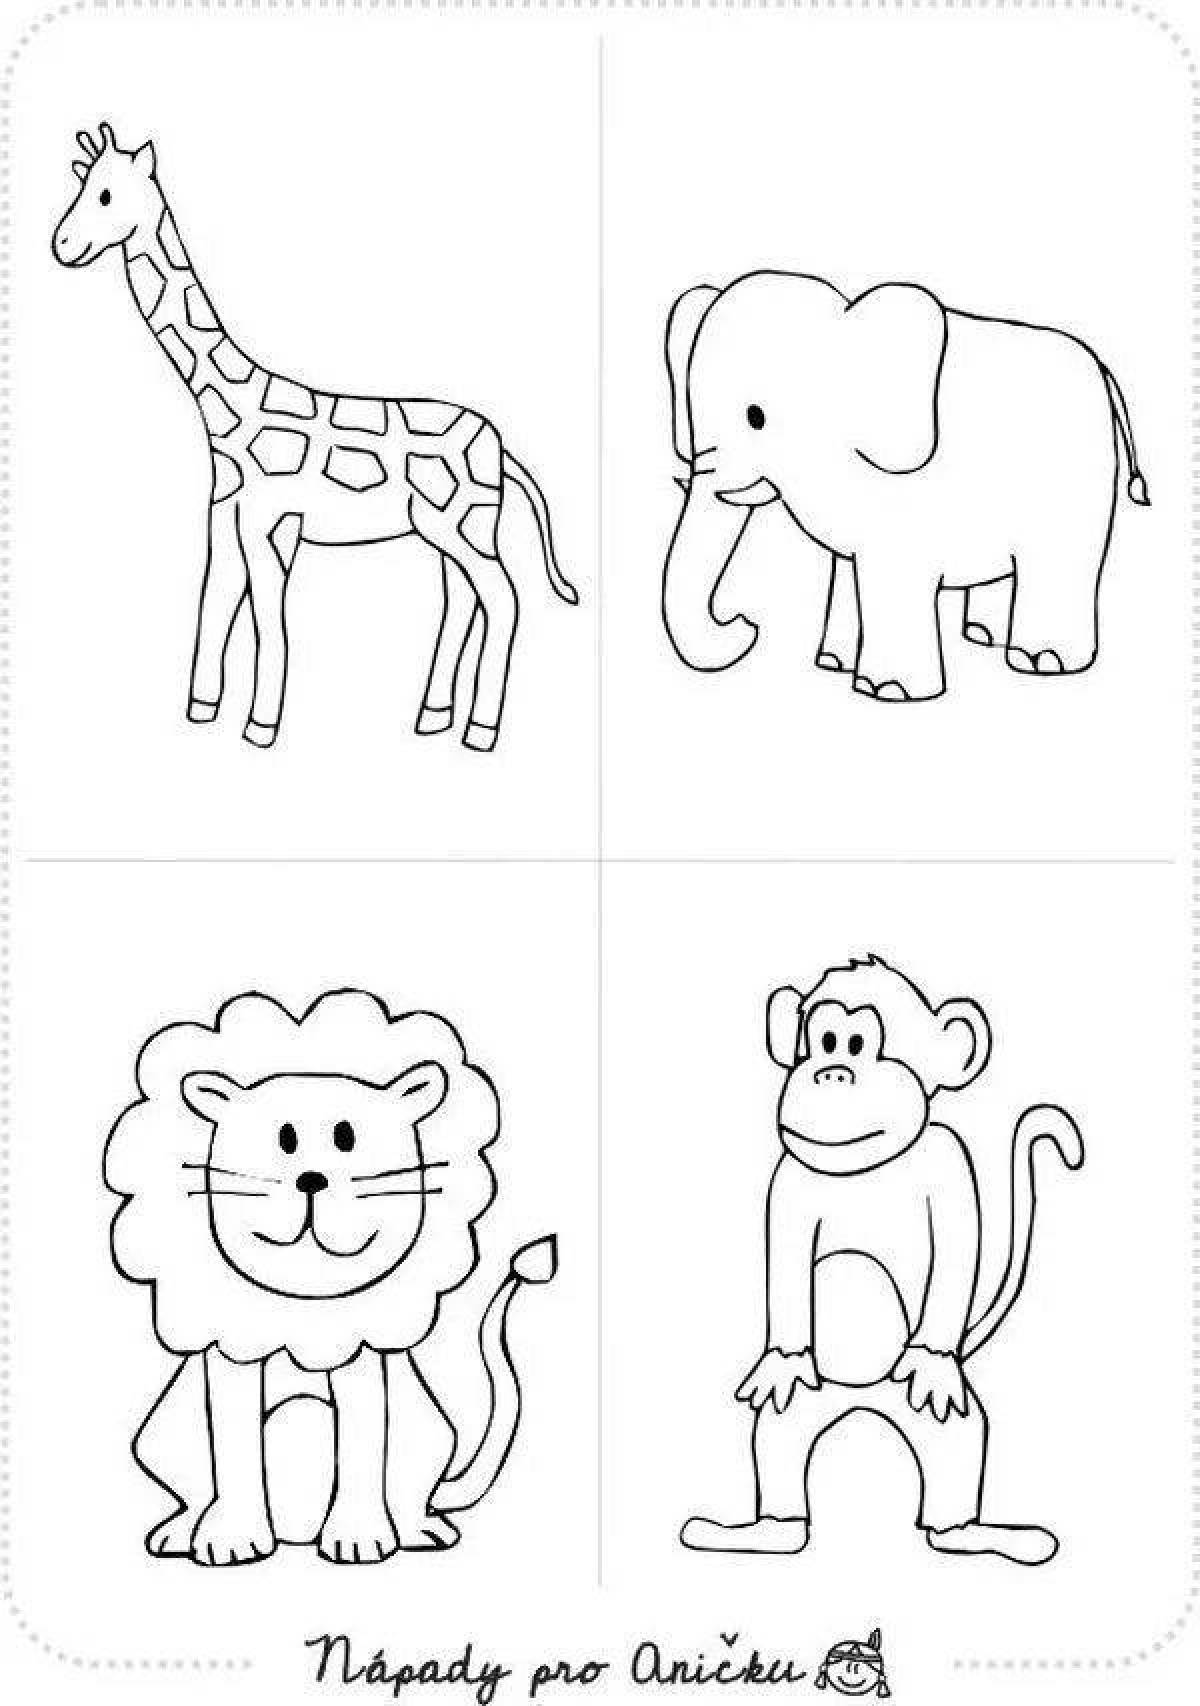 Perfect coloring animals of hot countries for children 3-4 years old